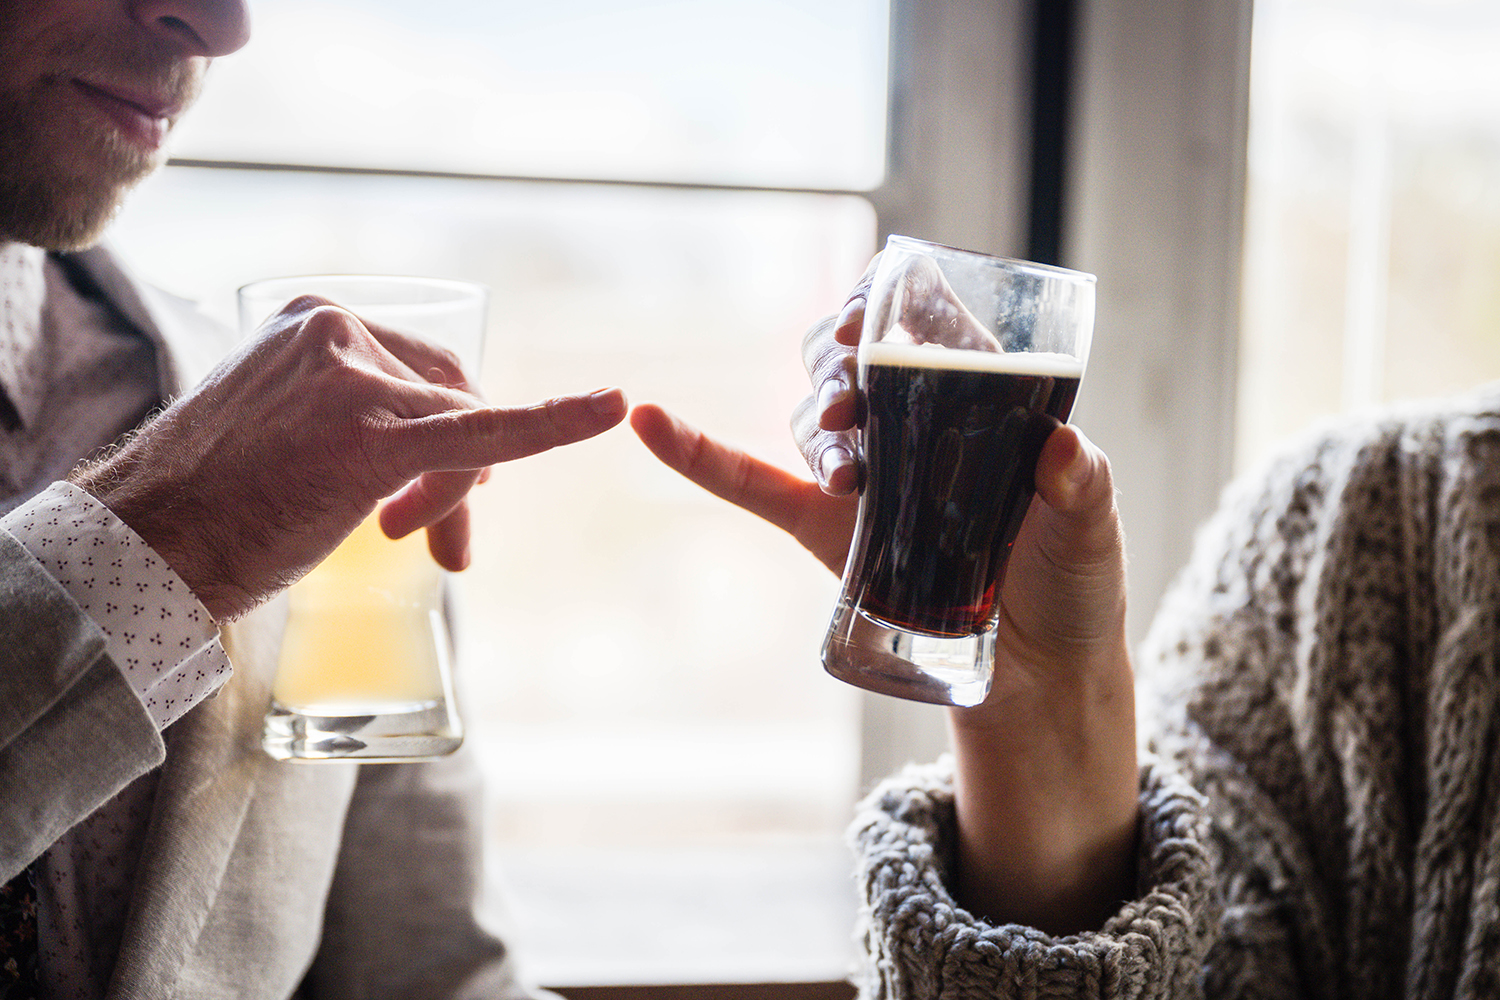 A couple does a special "cheers" handshake at Rising Silo Brewery in Blacksburg, Virginia.